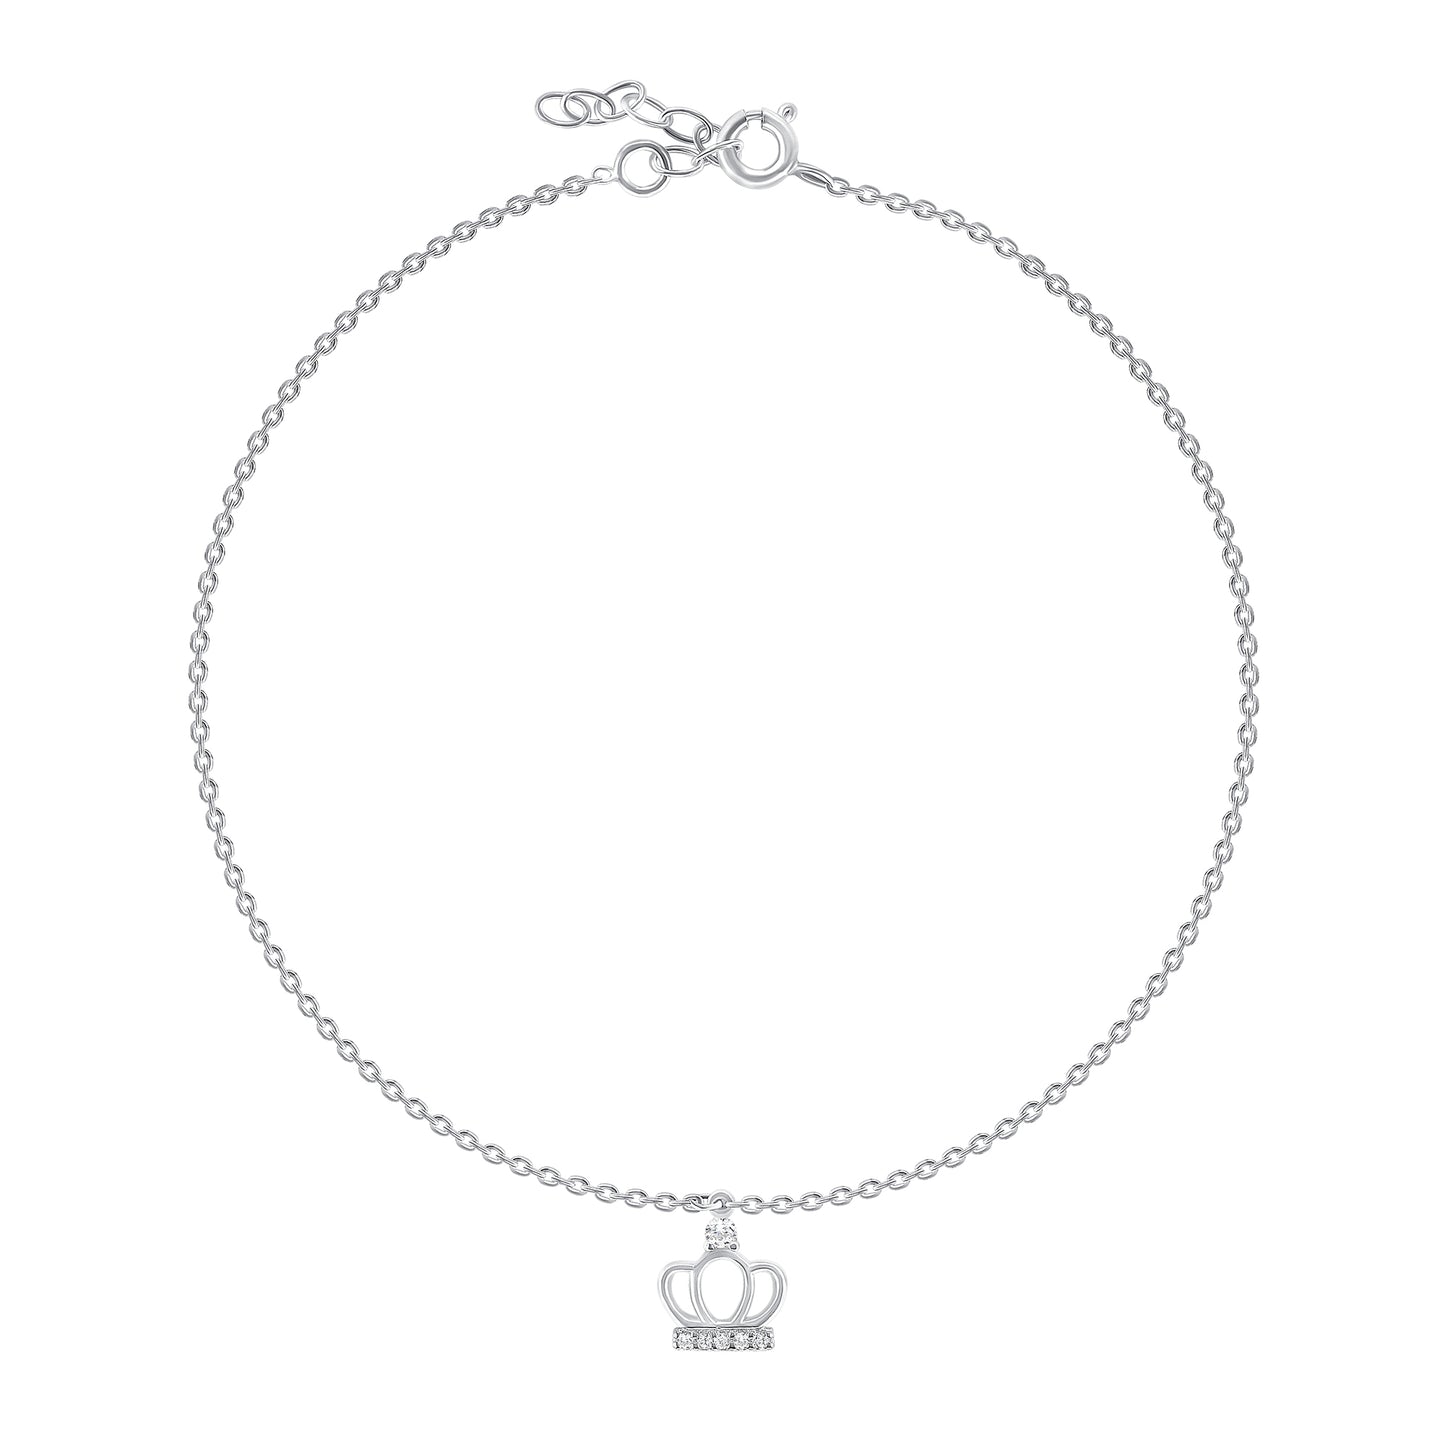 BF0173. Silver 925 Cubic Zirconia Crown Charm Anklet